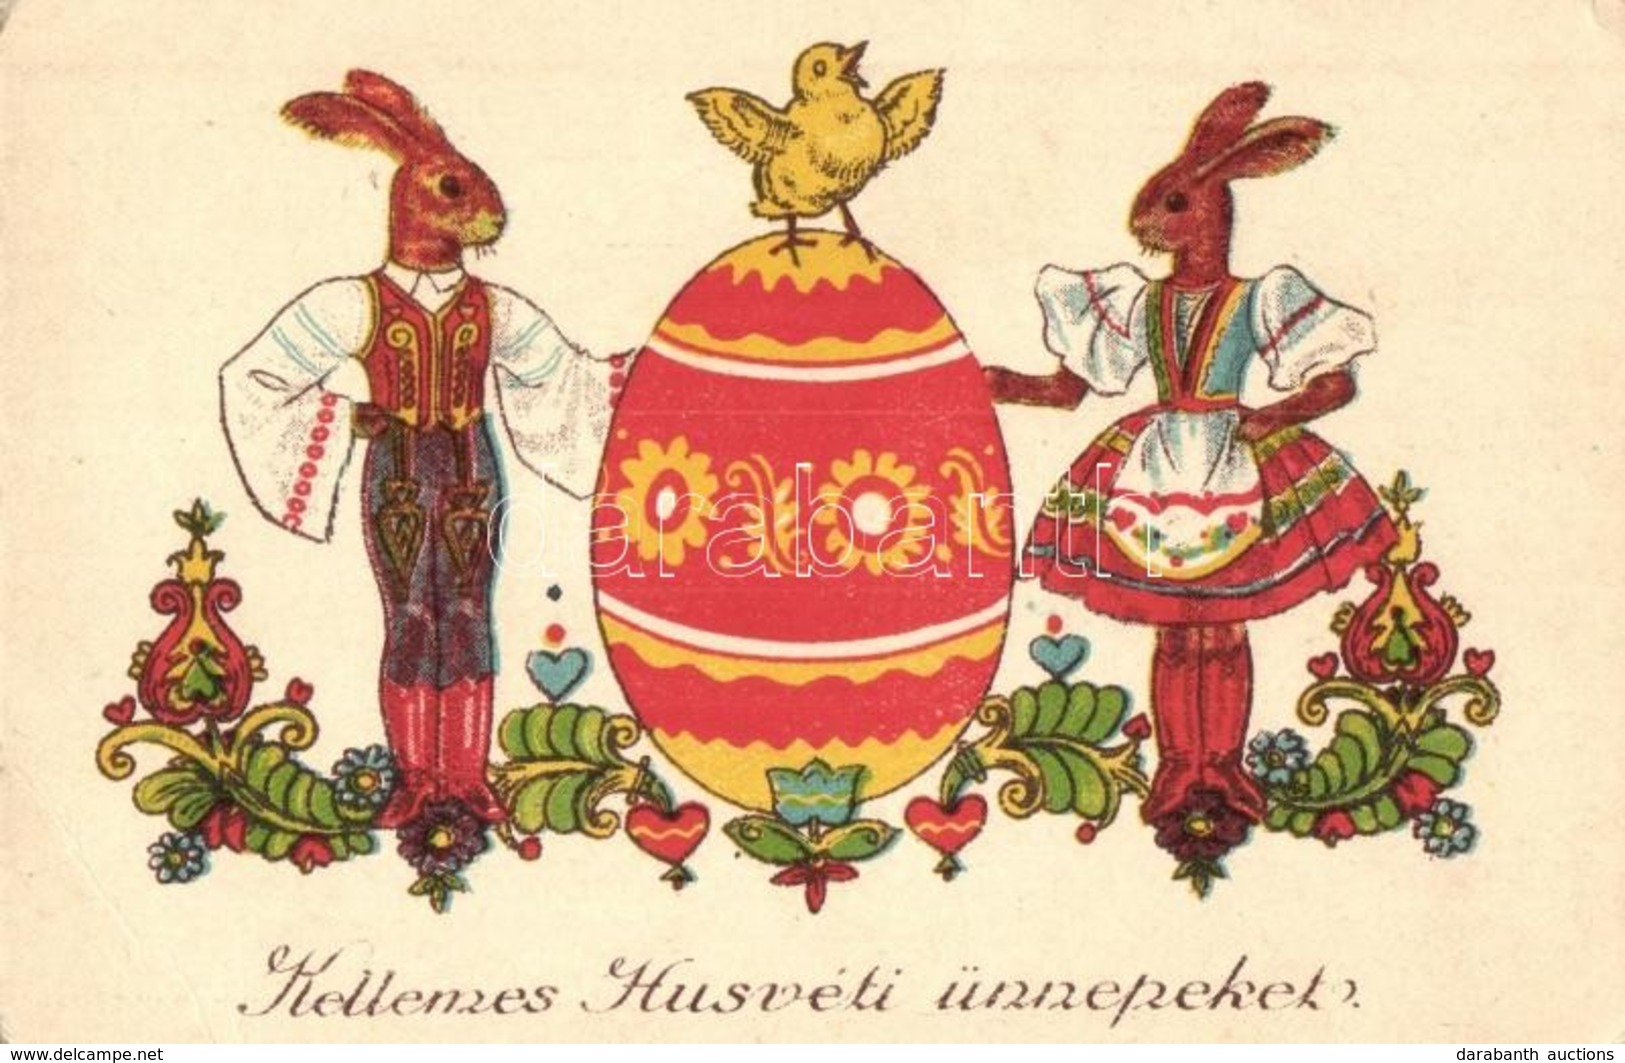 ** T2/T3 Easter, Rabbits In Hungarian Folklore Costumes (EB) - Ohne Zuordnung